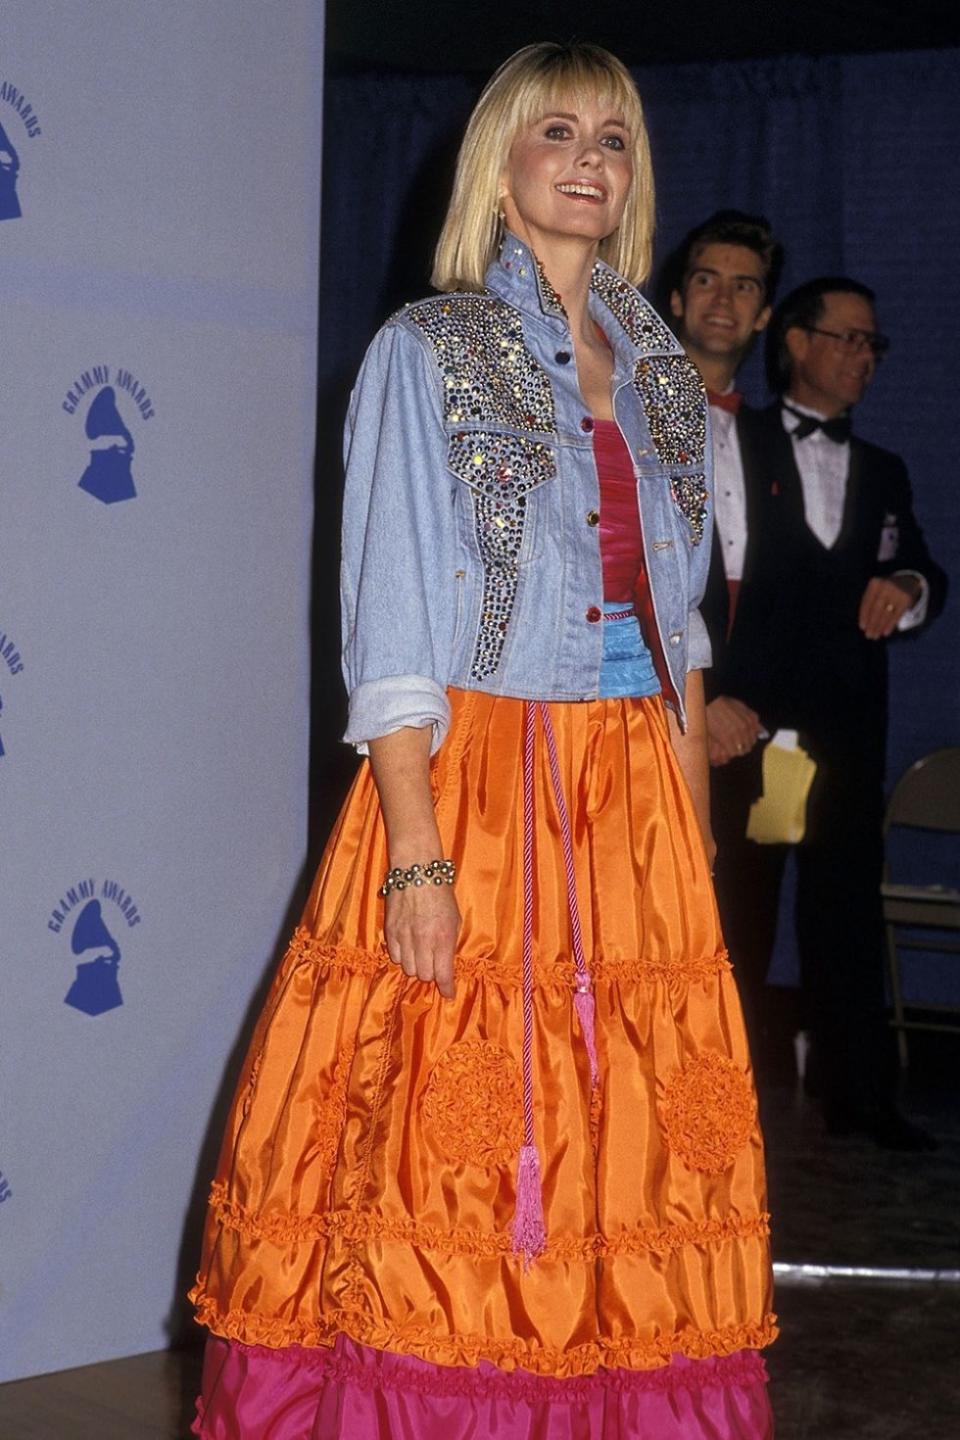 <p>I like to think ONJ spent the week before the Grammys sitting at home bedazzling that denim jacket herself. Just look at the expression on her face — that's pride in a handy craft well done.</p>